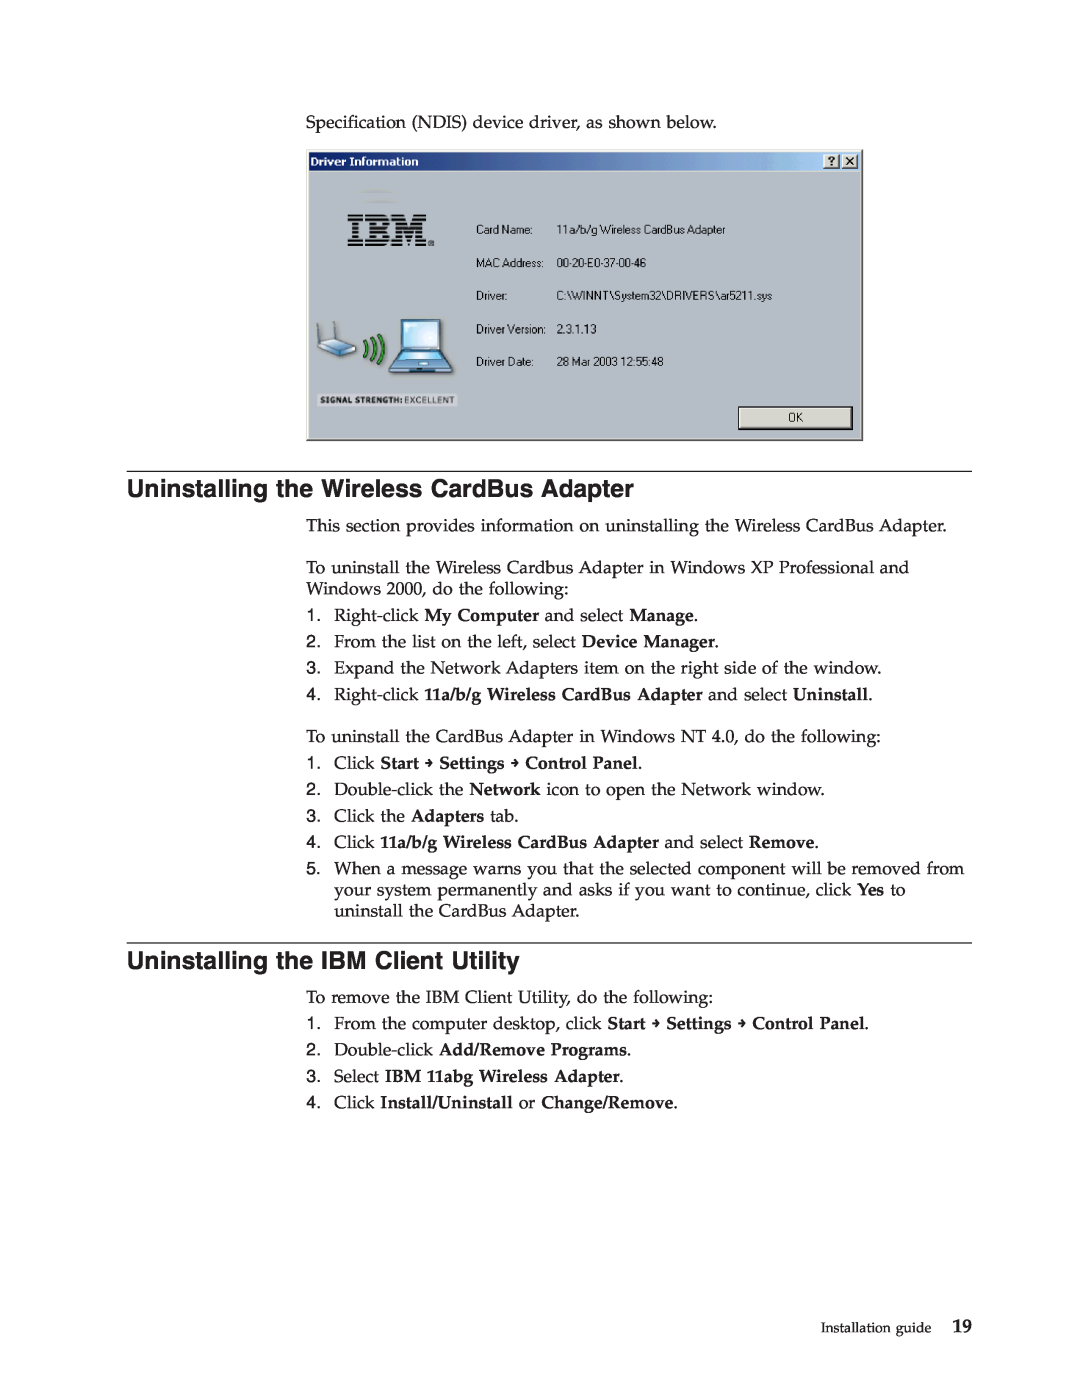 Trust Computer Products IBM 802.11a/b/g Wireless CardBus Adapter manual Uninstalling the Wireless CardBus Adapter 